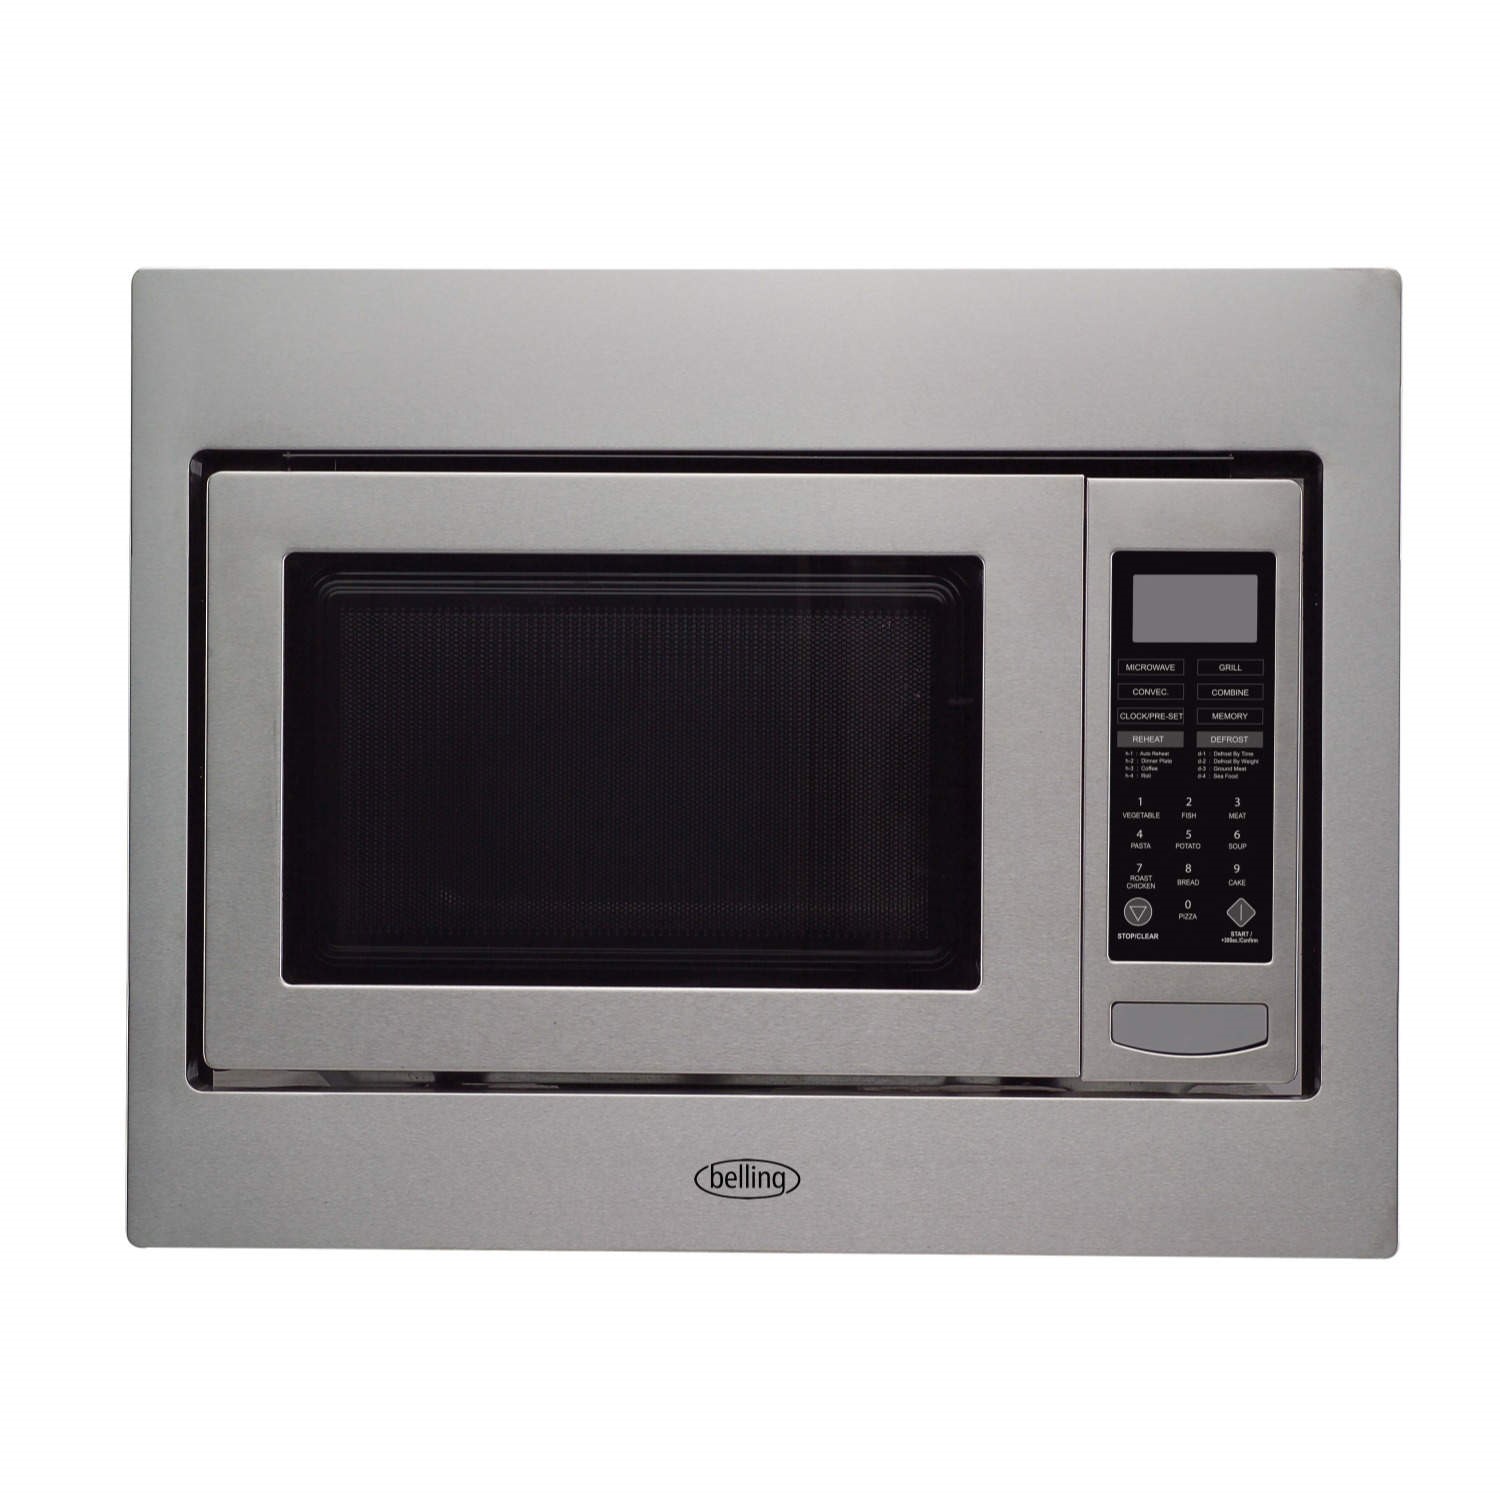 Belling BIMW60 25L 900W Built-in Combination Microwave Oven - Stainless Steel